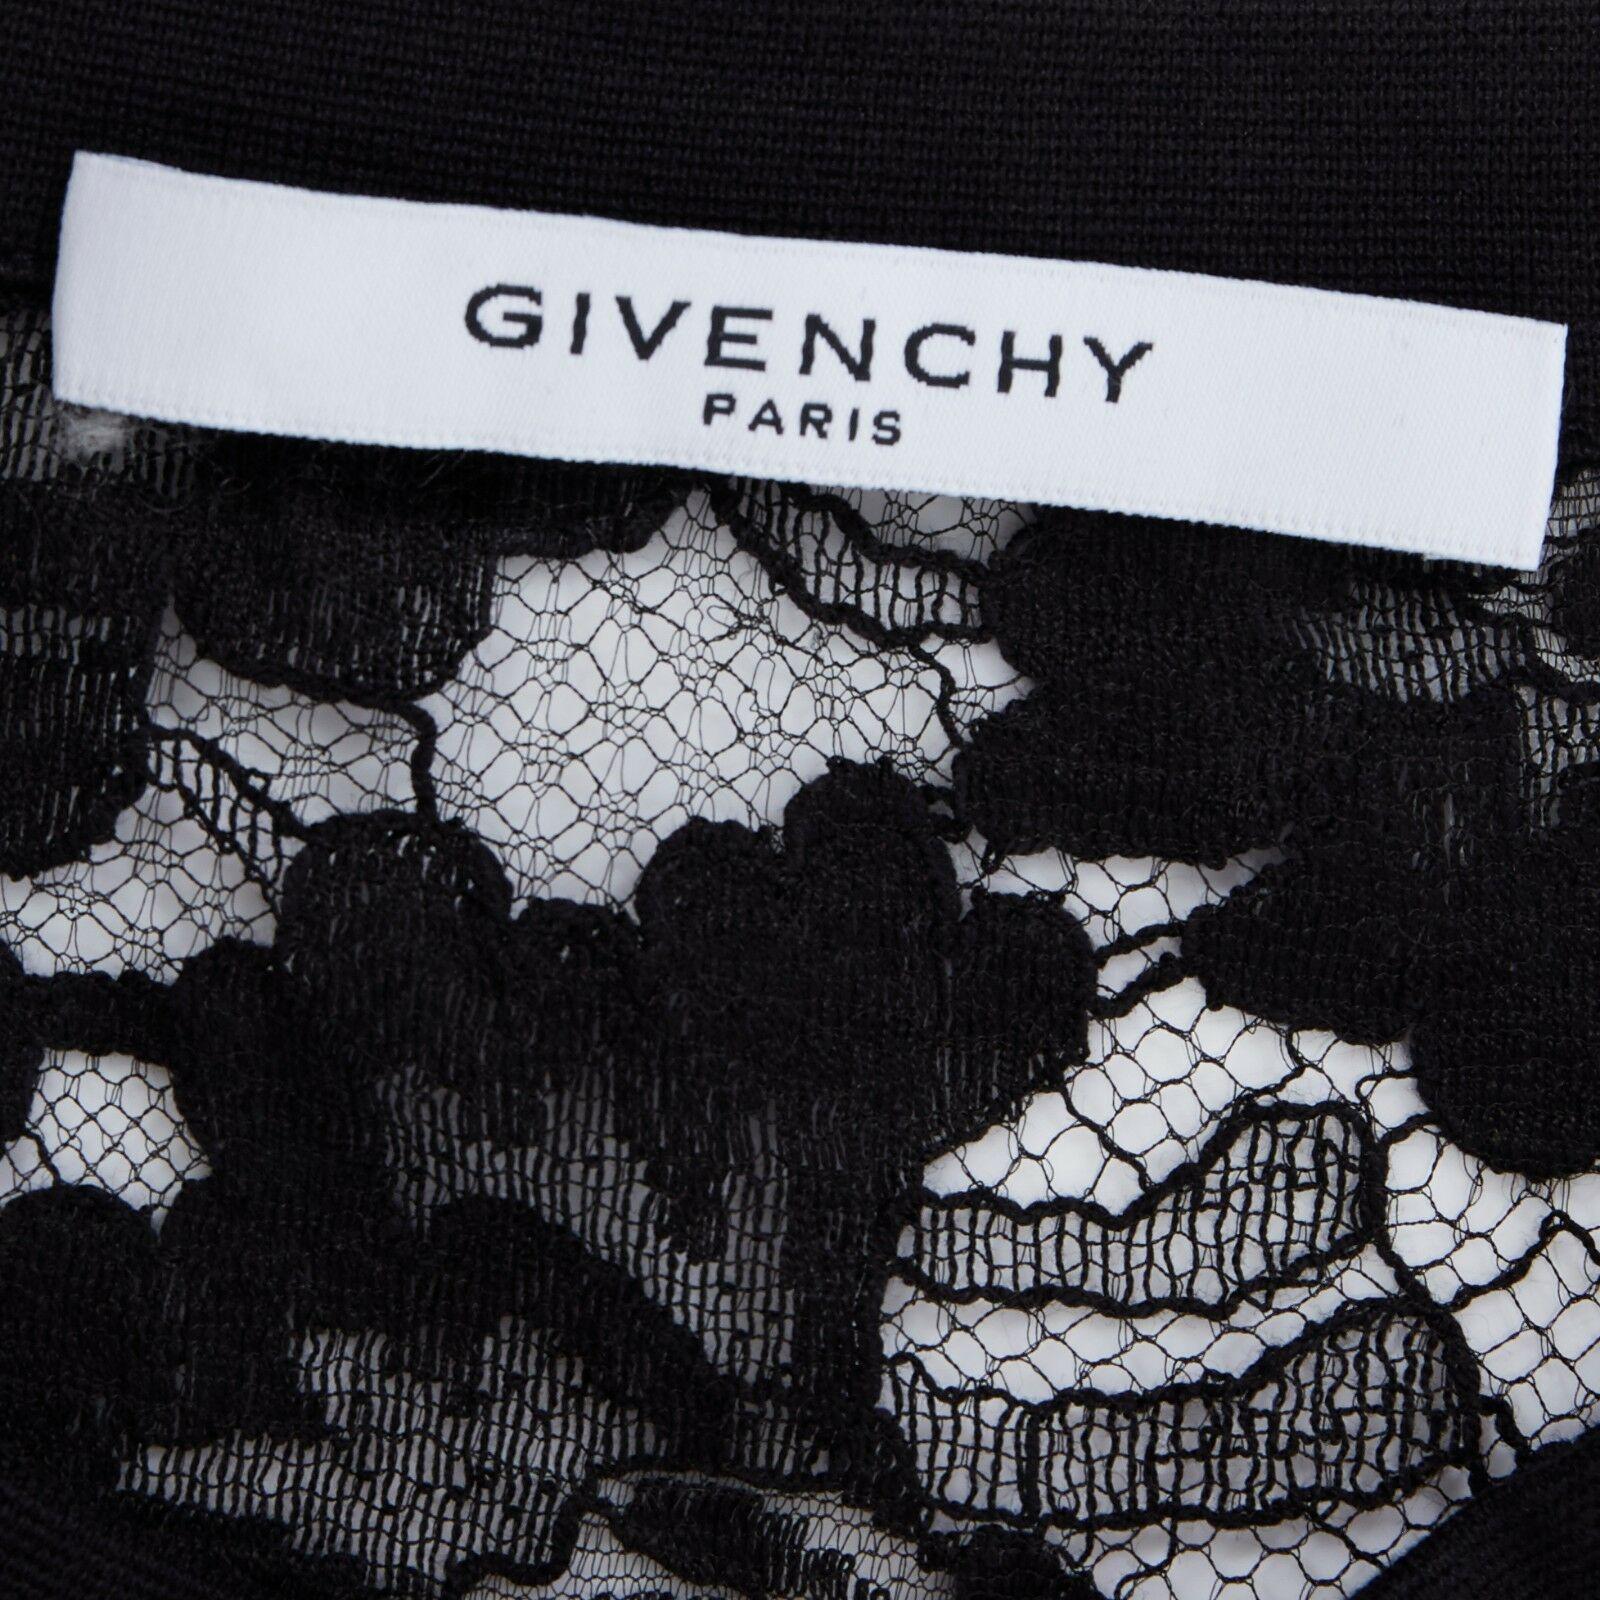 GIVENCHY TISCI black sheer lace Pervert 17 patched football jersey top IT38 M 3